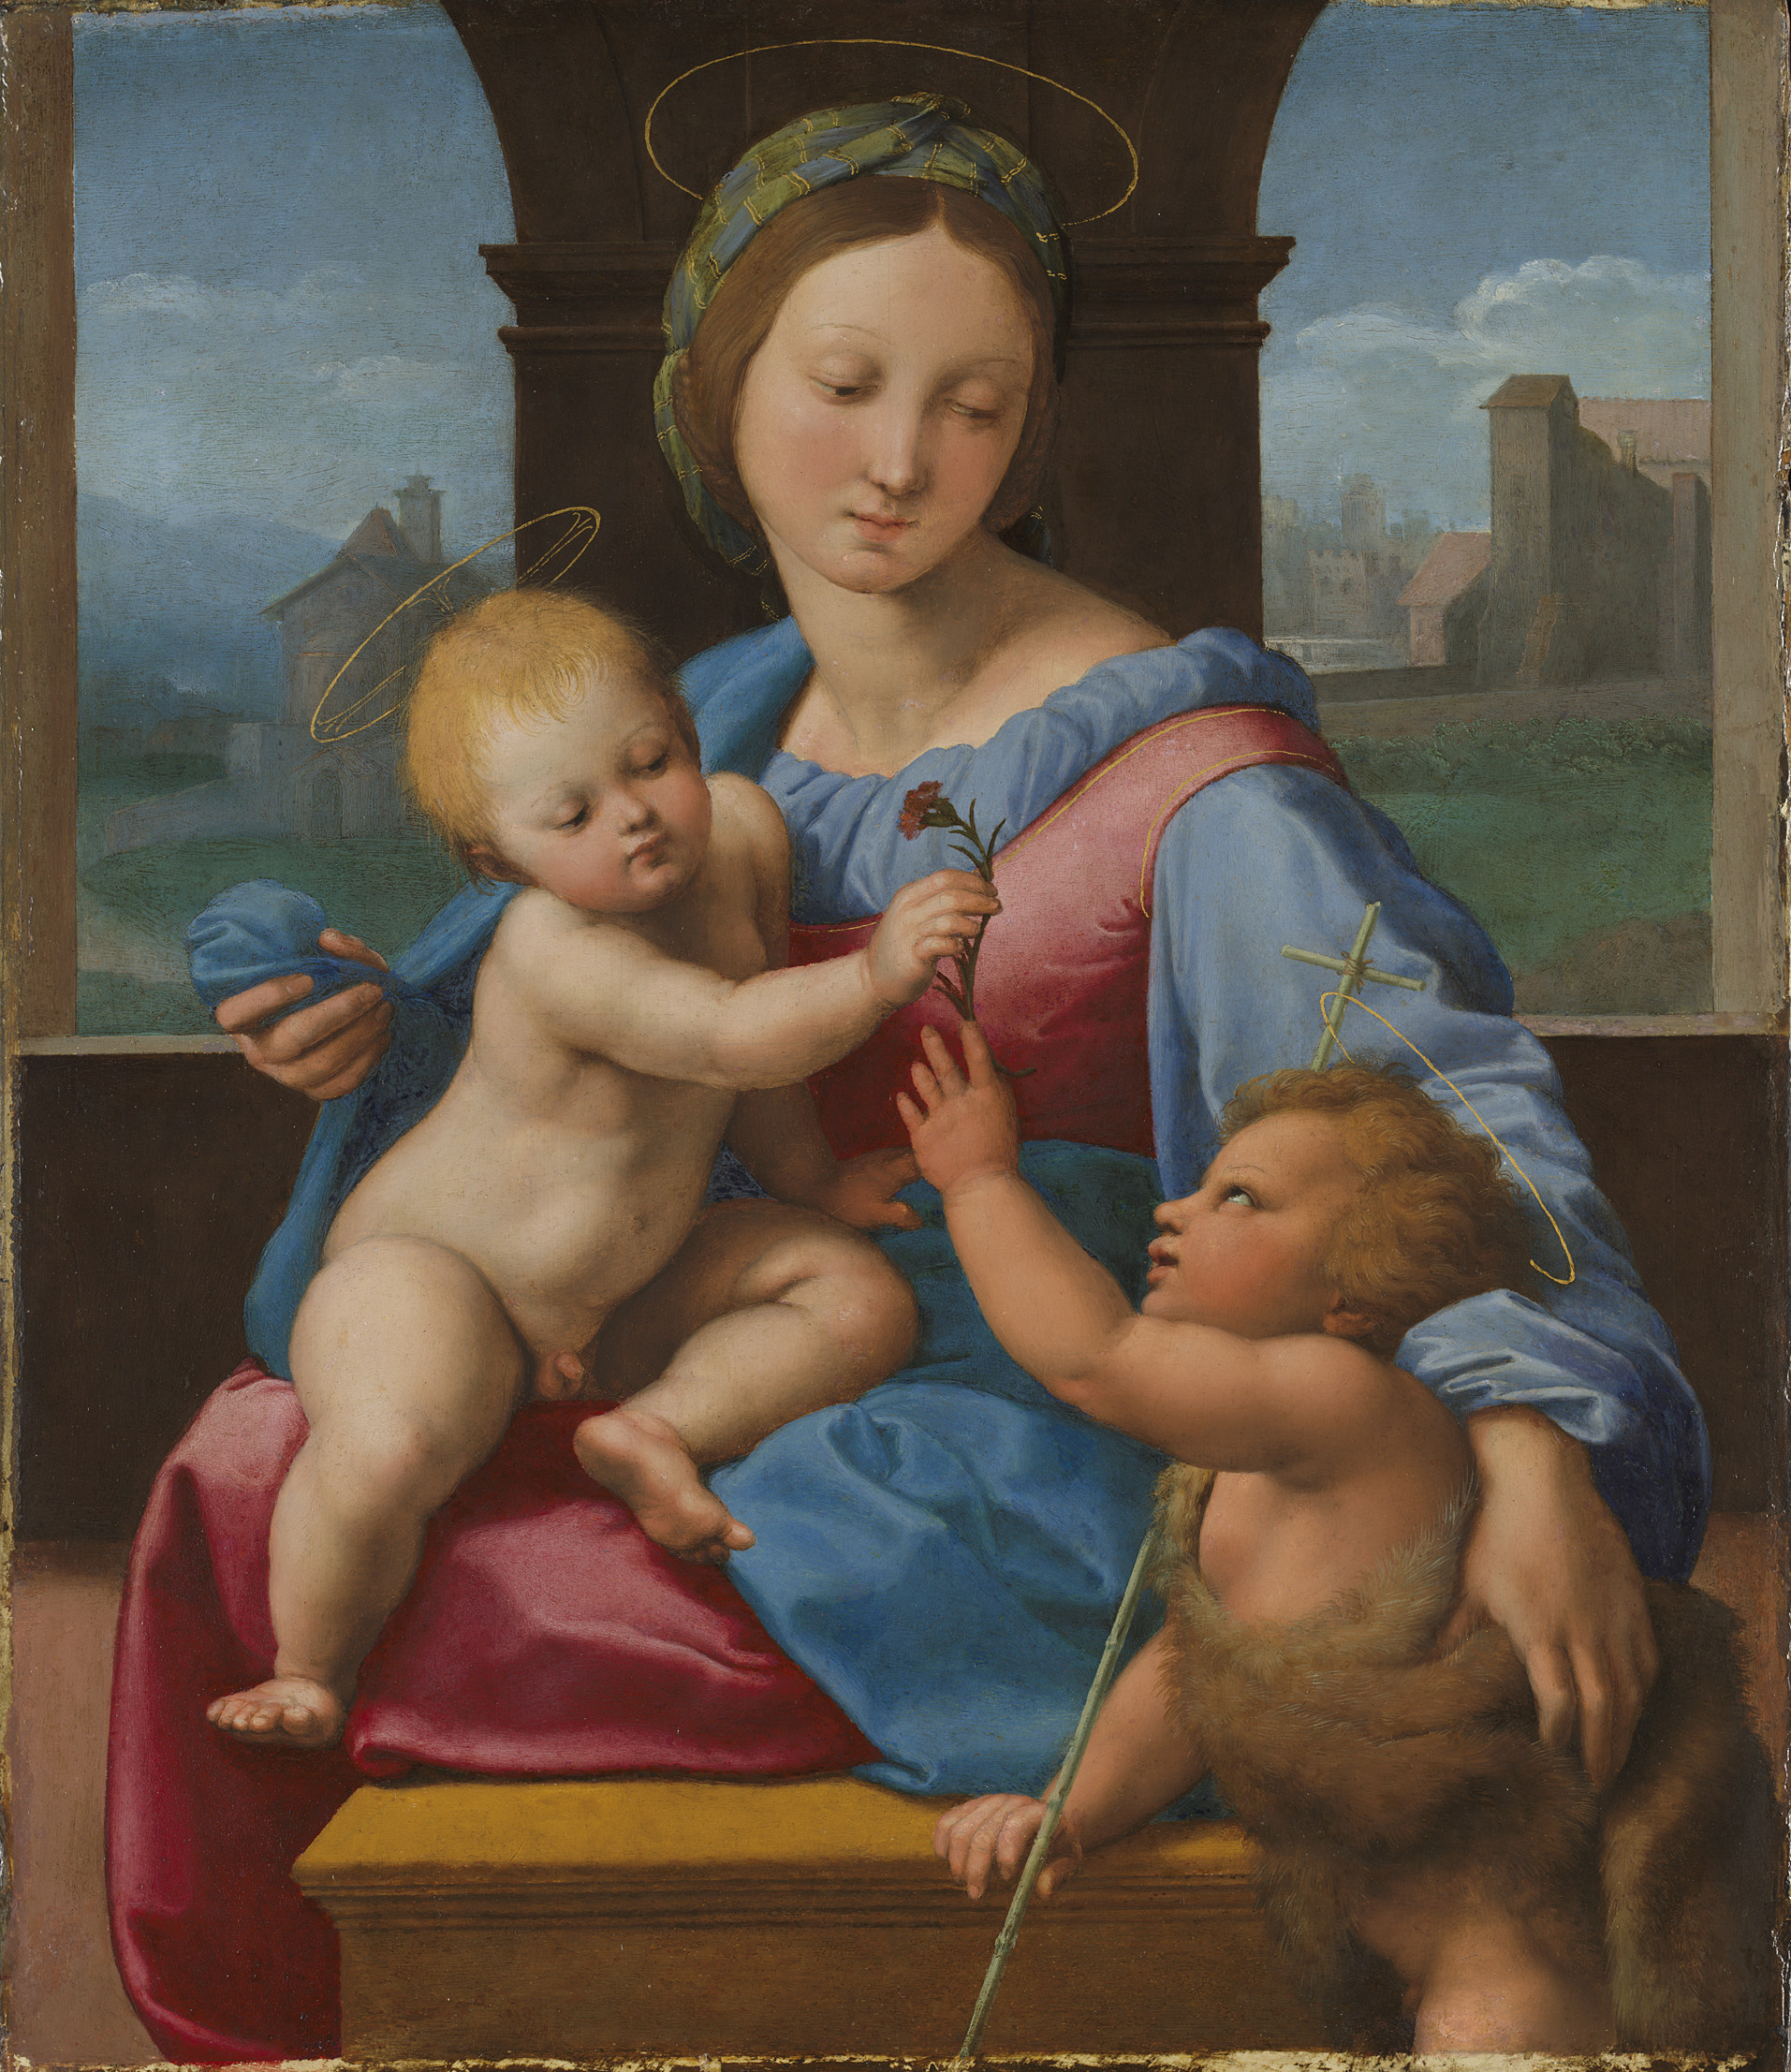 Detail from The Garvagh Madonna (c. 1510-11) by Raphael is among 52 paintings from the collection of the UK’s National Gallery going on show in Shanghai in a collaboration that may be “the most ambitious project” ever to show Western art in China. Photo: National Gallery, London